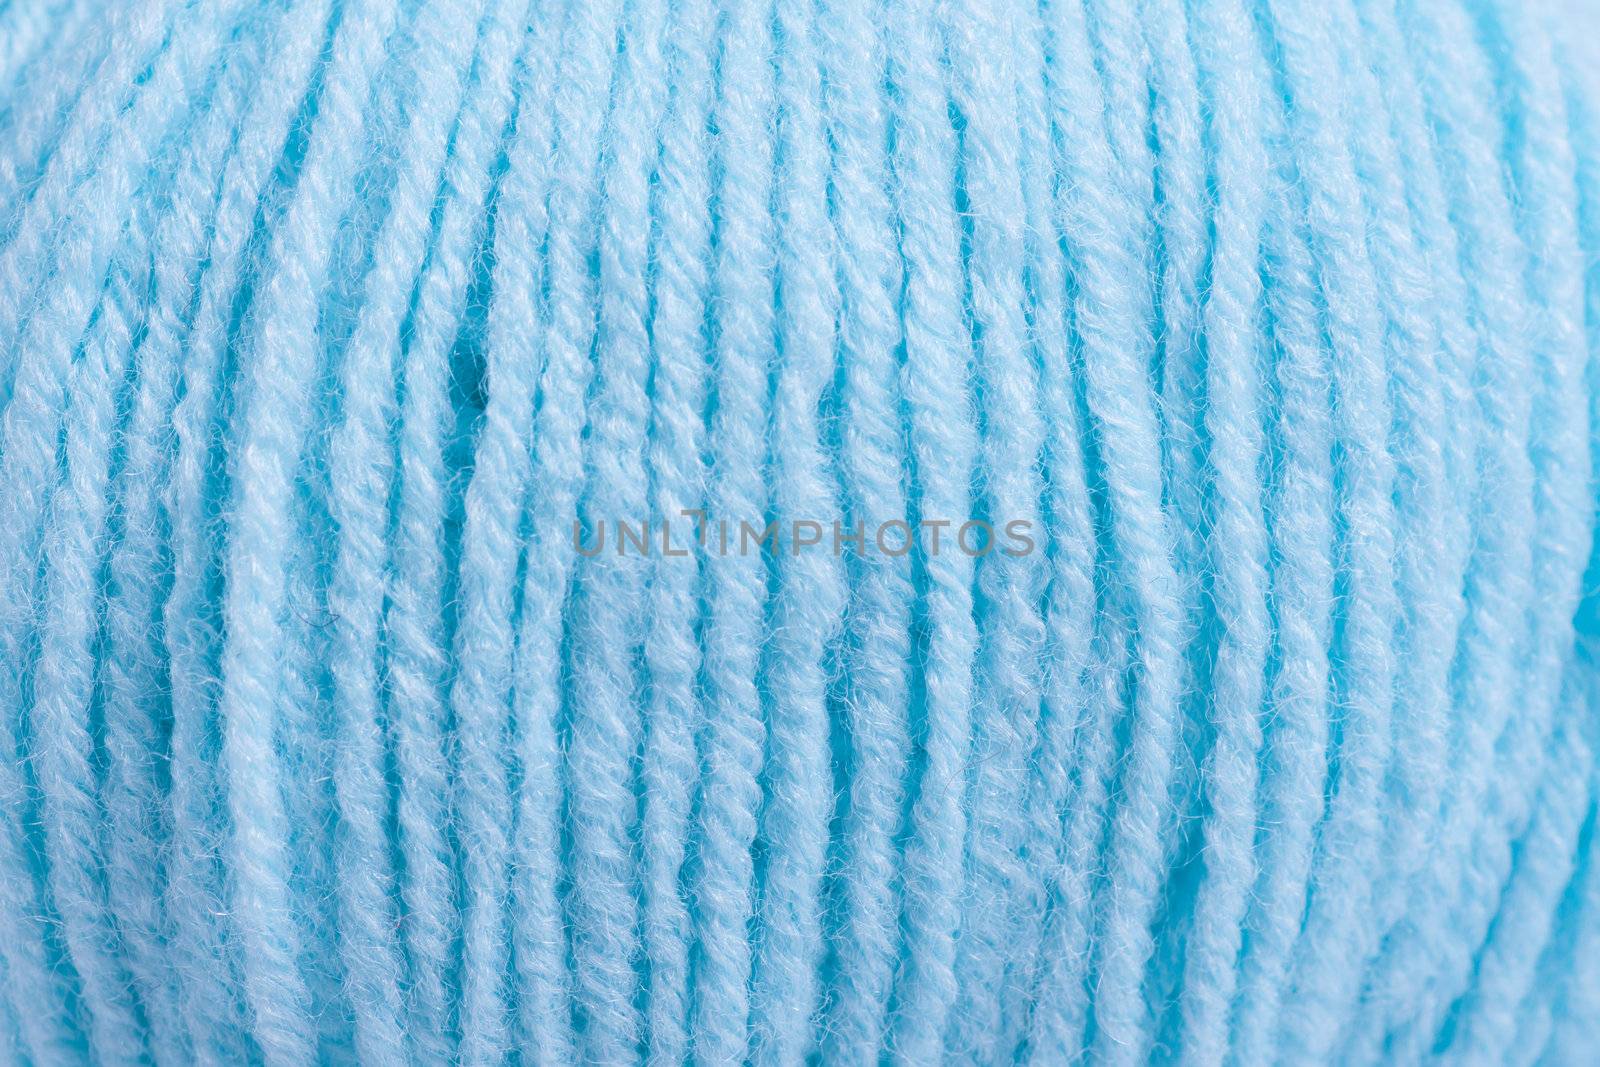 Macro view of blue wool ball texture